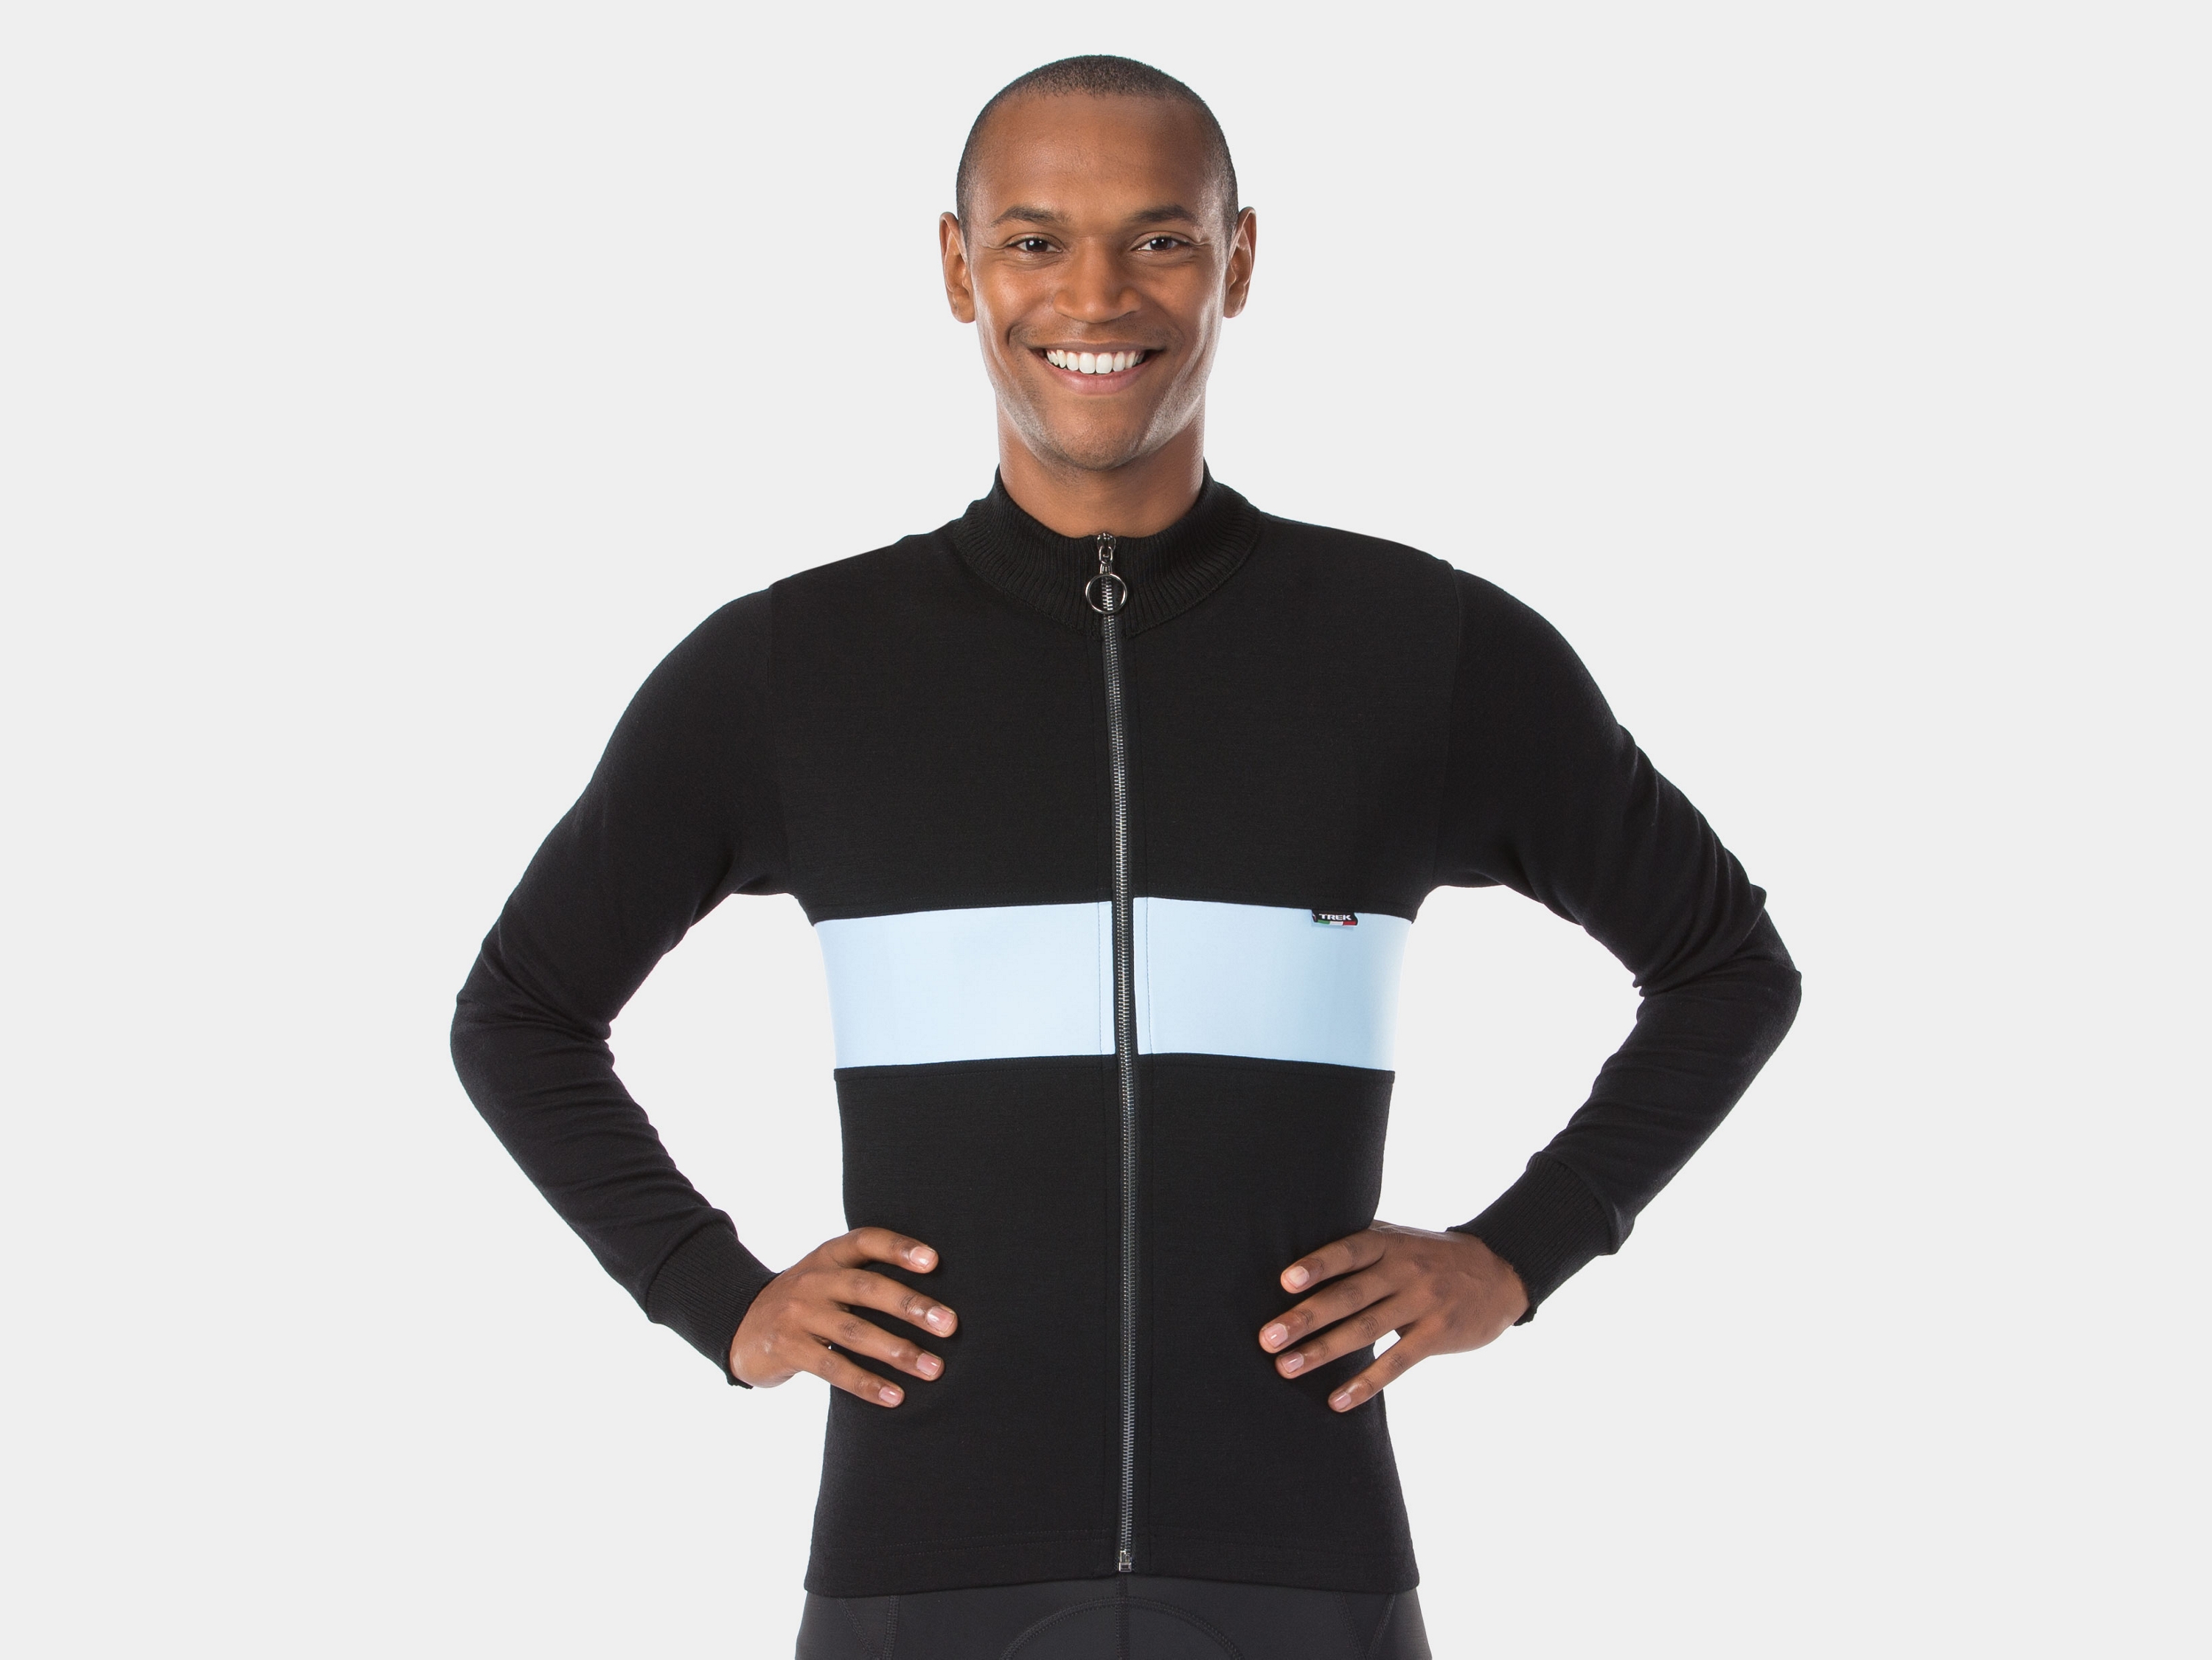 wool bicycle jersey